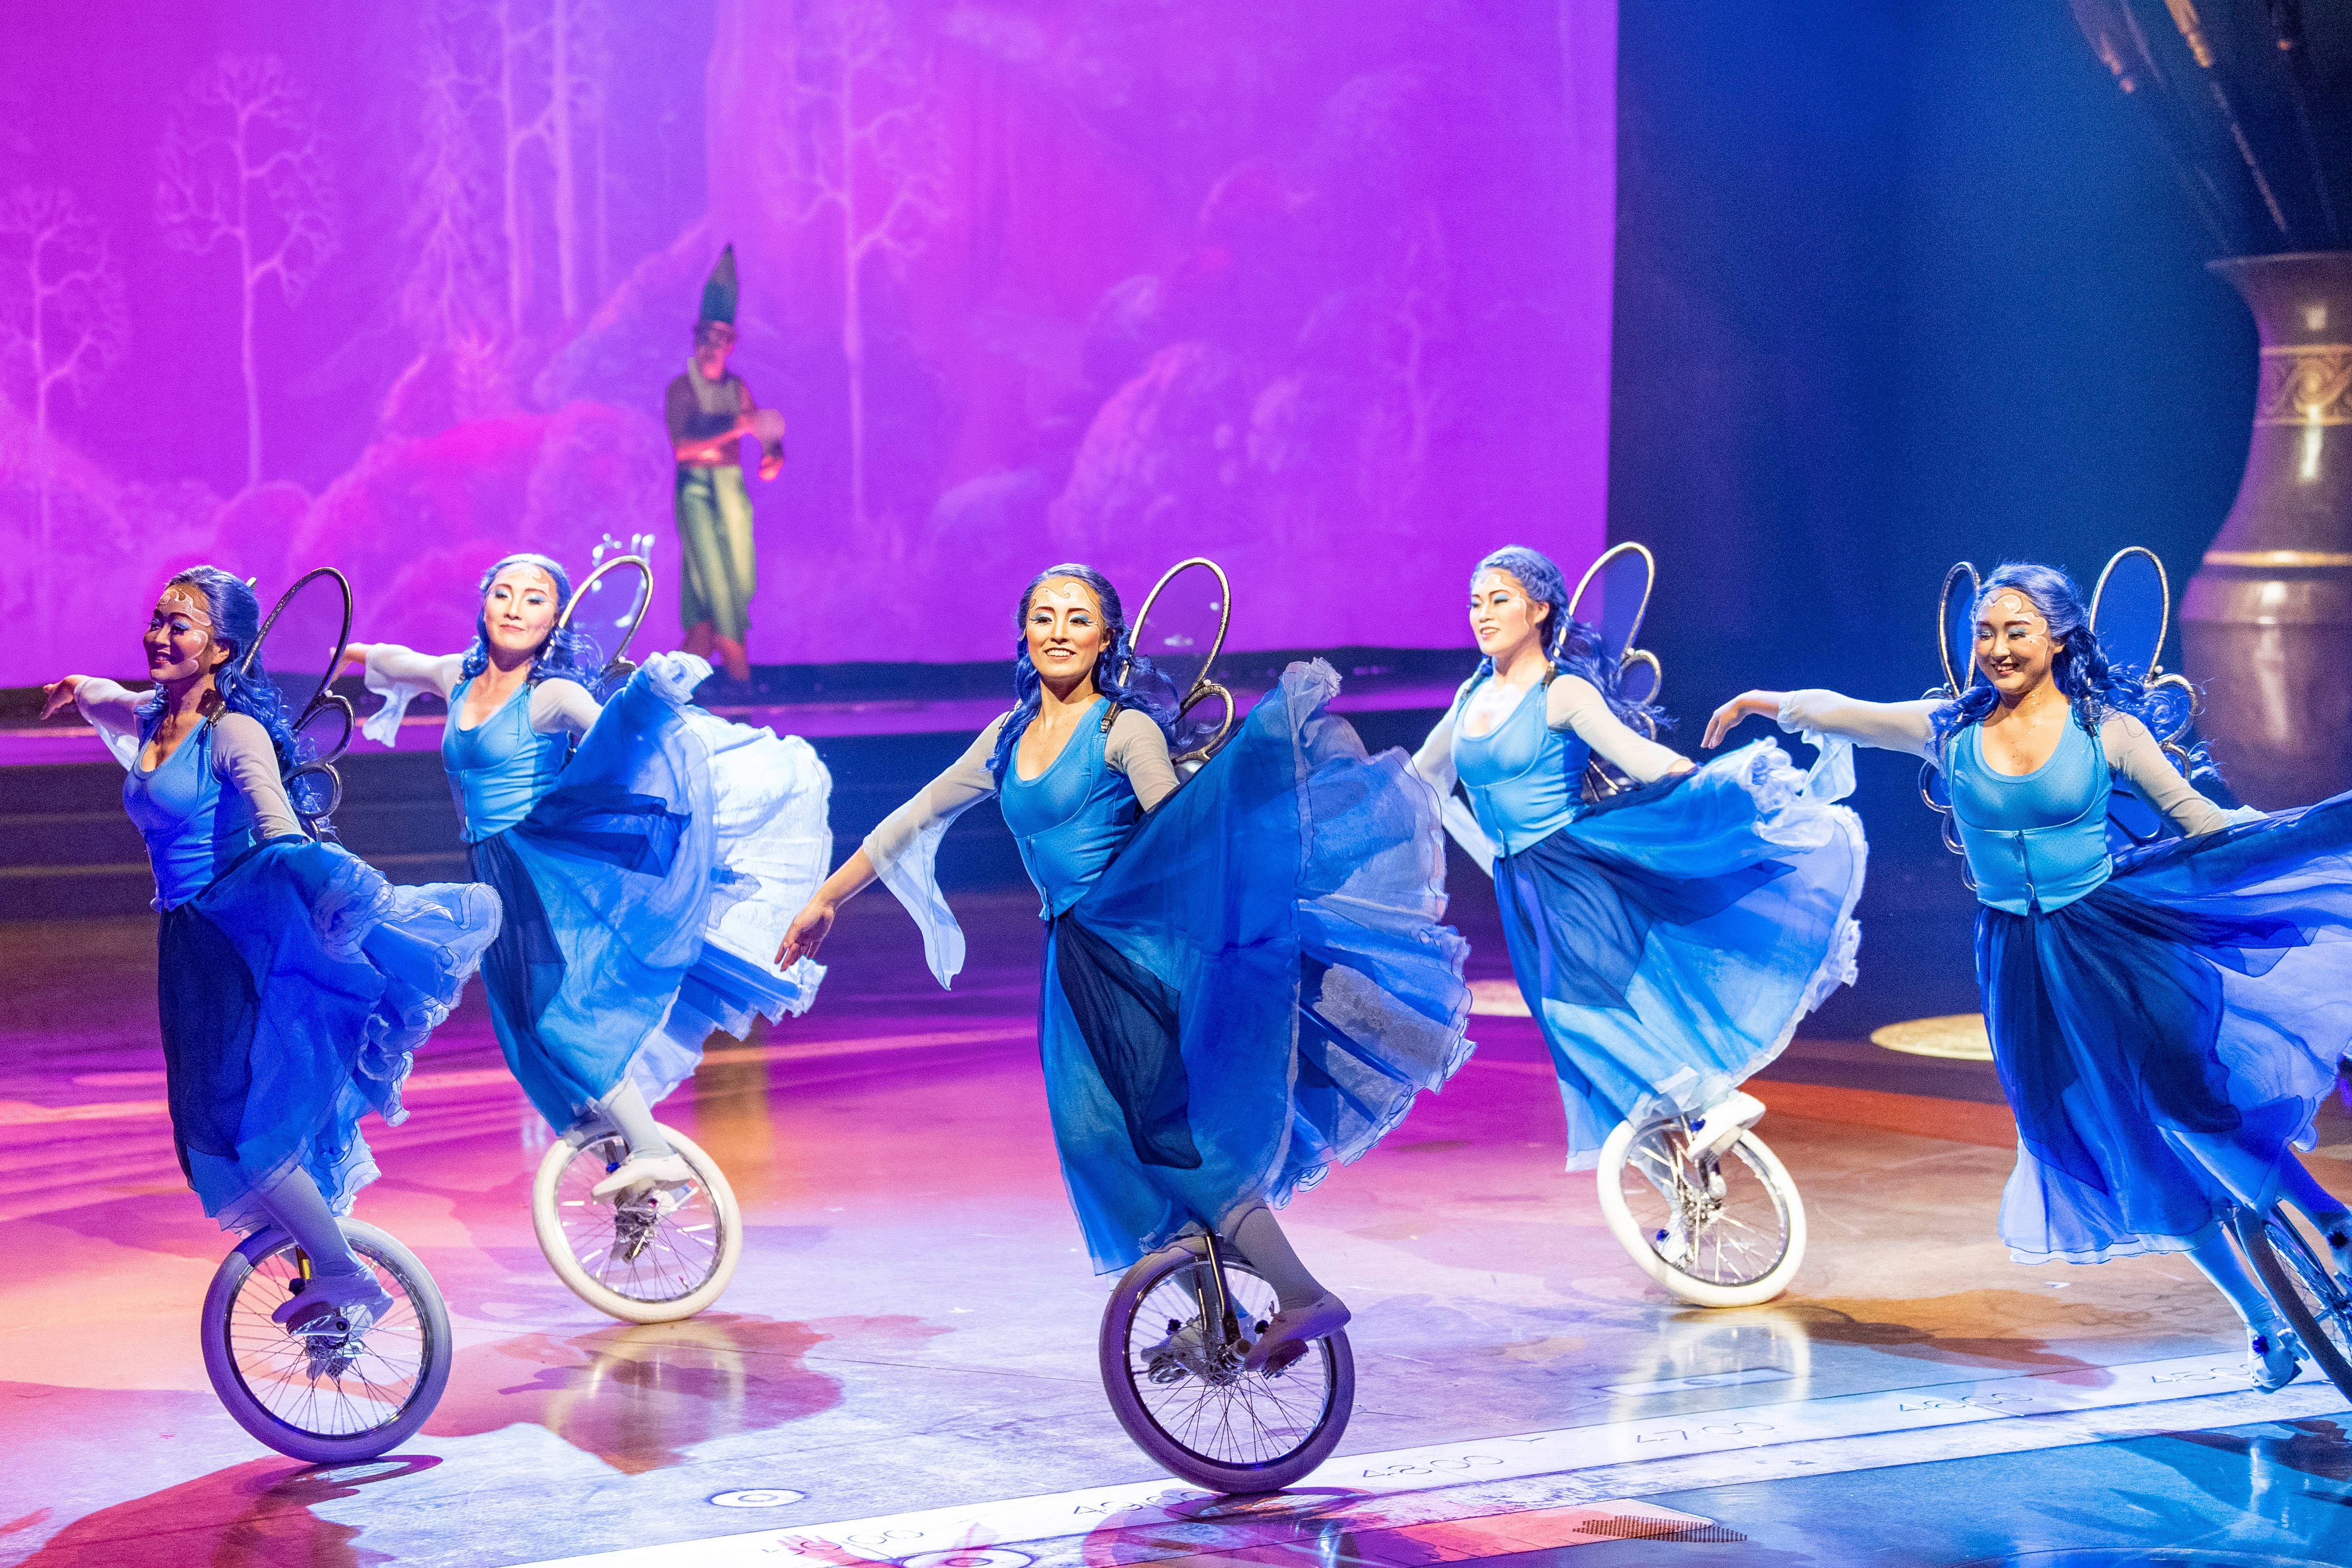 Five playful unicyclists representing the Blue Fairy from the classic Disney Animation film “Pinocchio” appear to effortlessly float across the stage during Drawn to Life